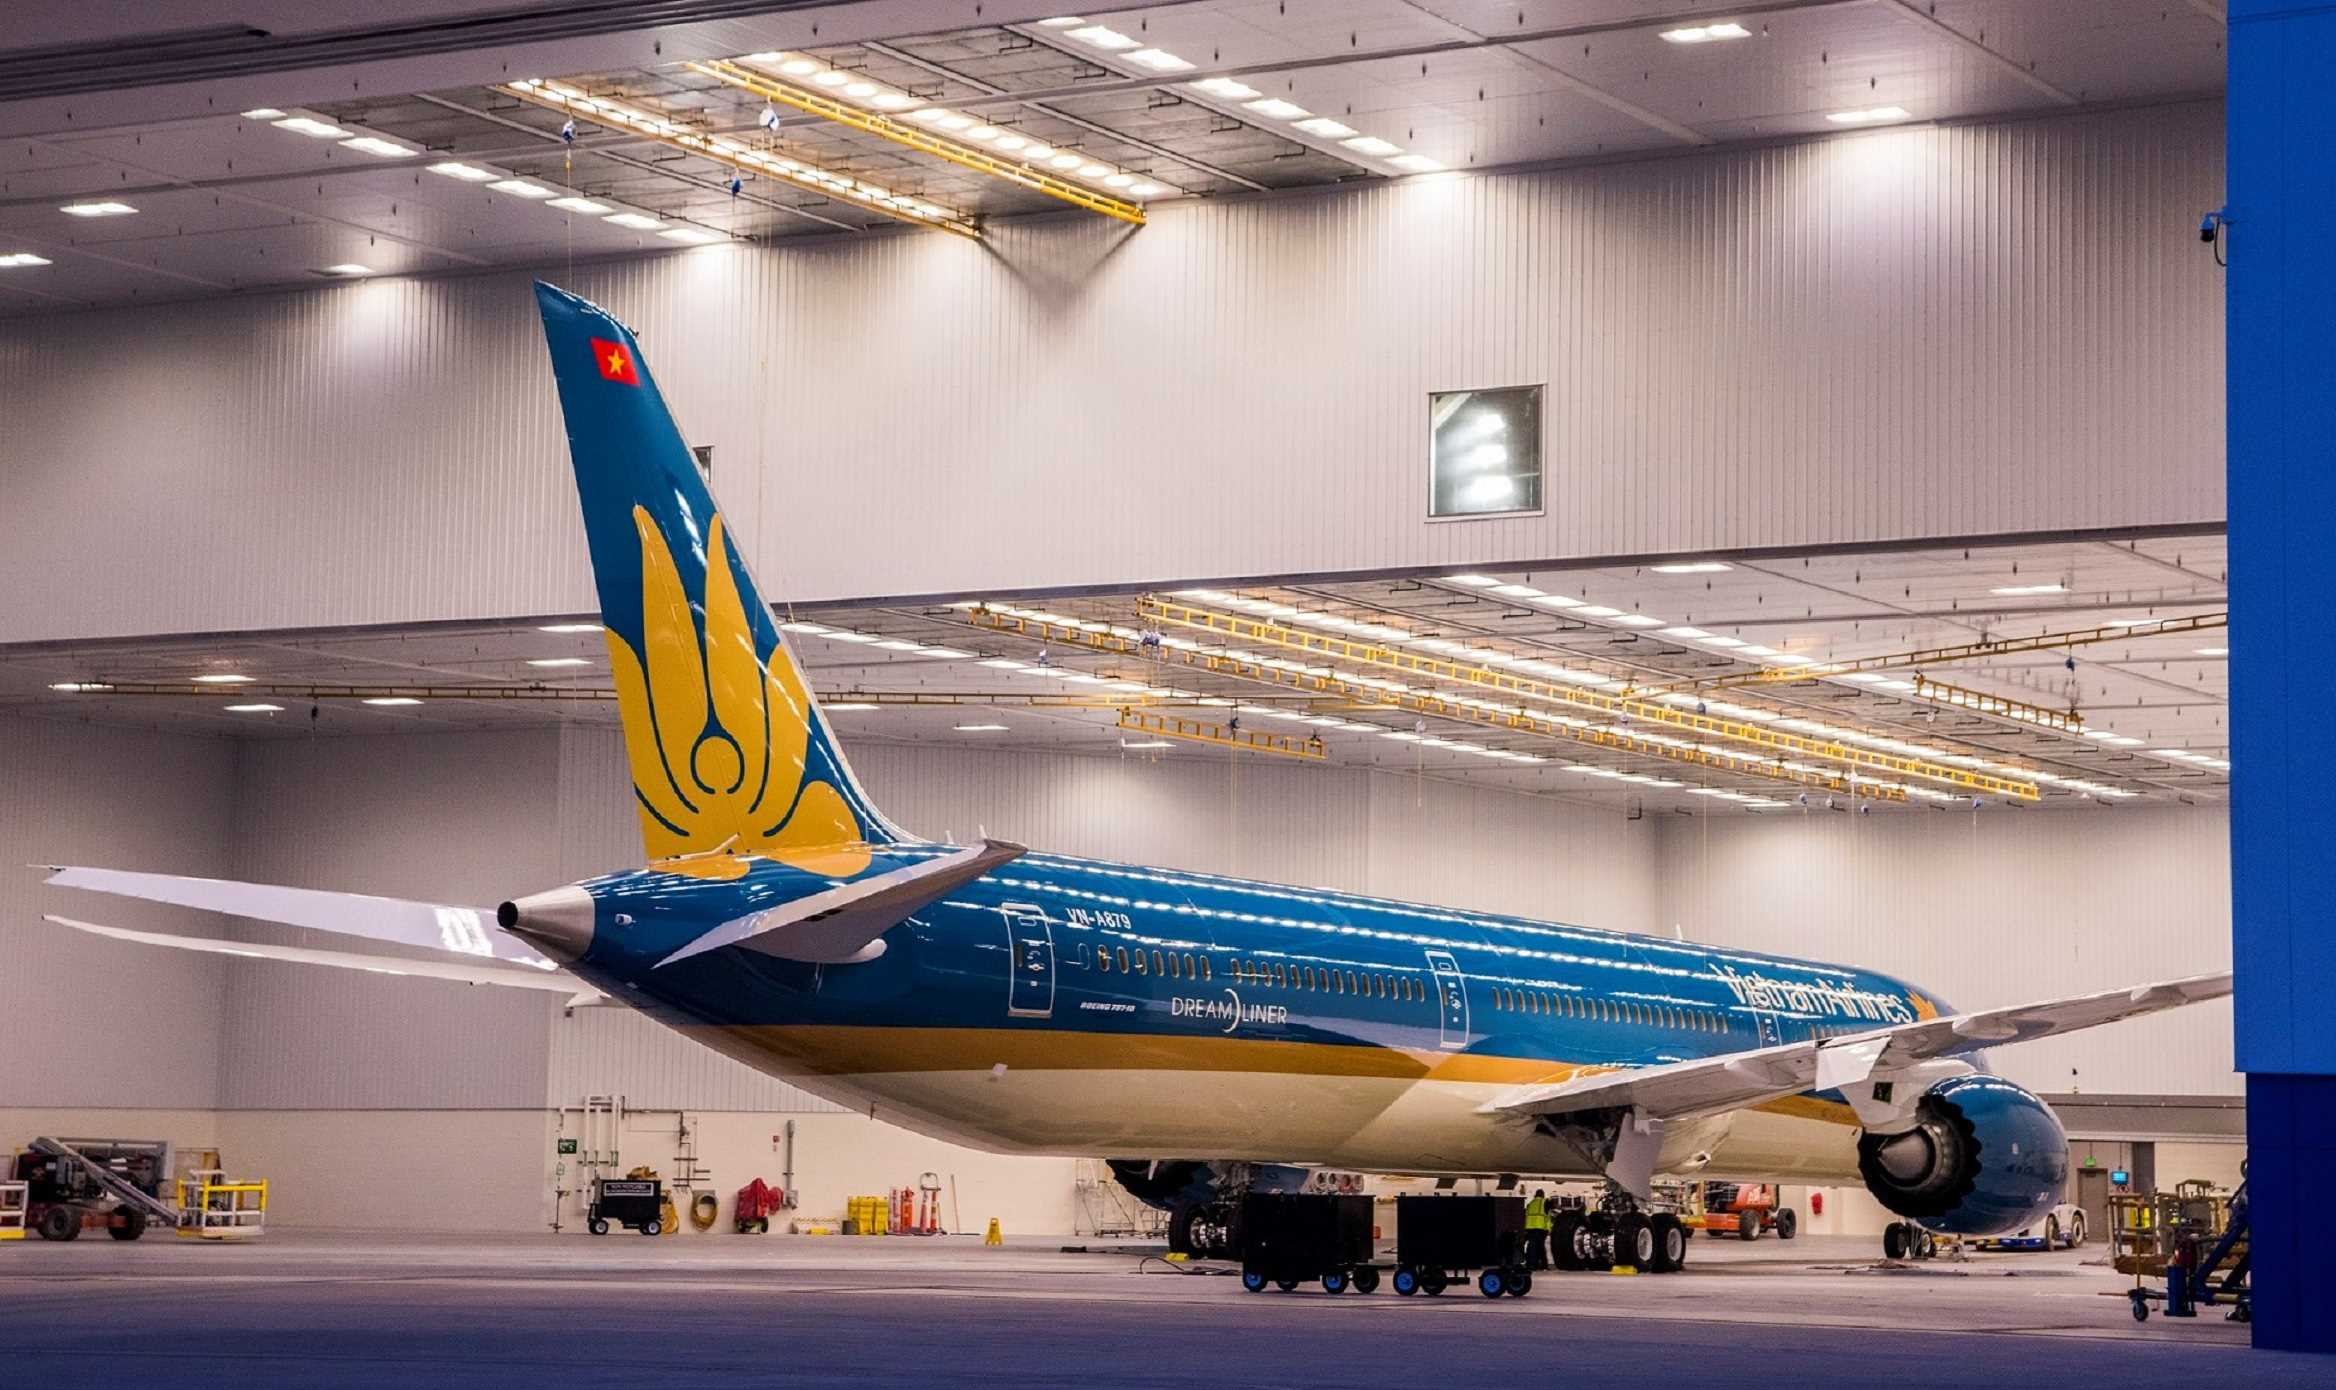 Vietnam Airlines operates direct flights with a frequency of approximately 4 times a week from London to Hanoi and 3 times a week from London to Ho Chi Minh City. (Source: Vietnam Airlines)